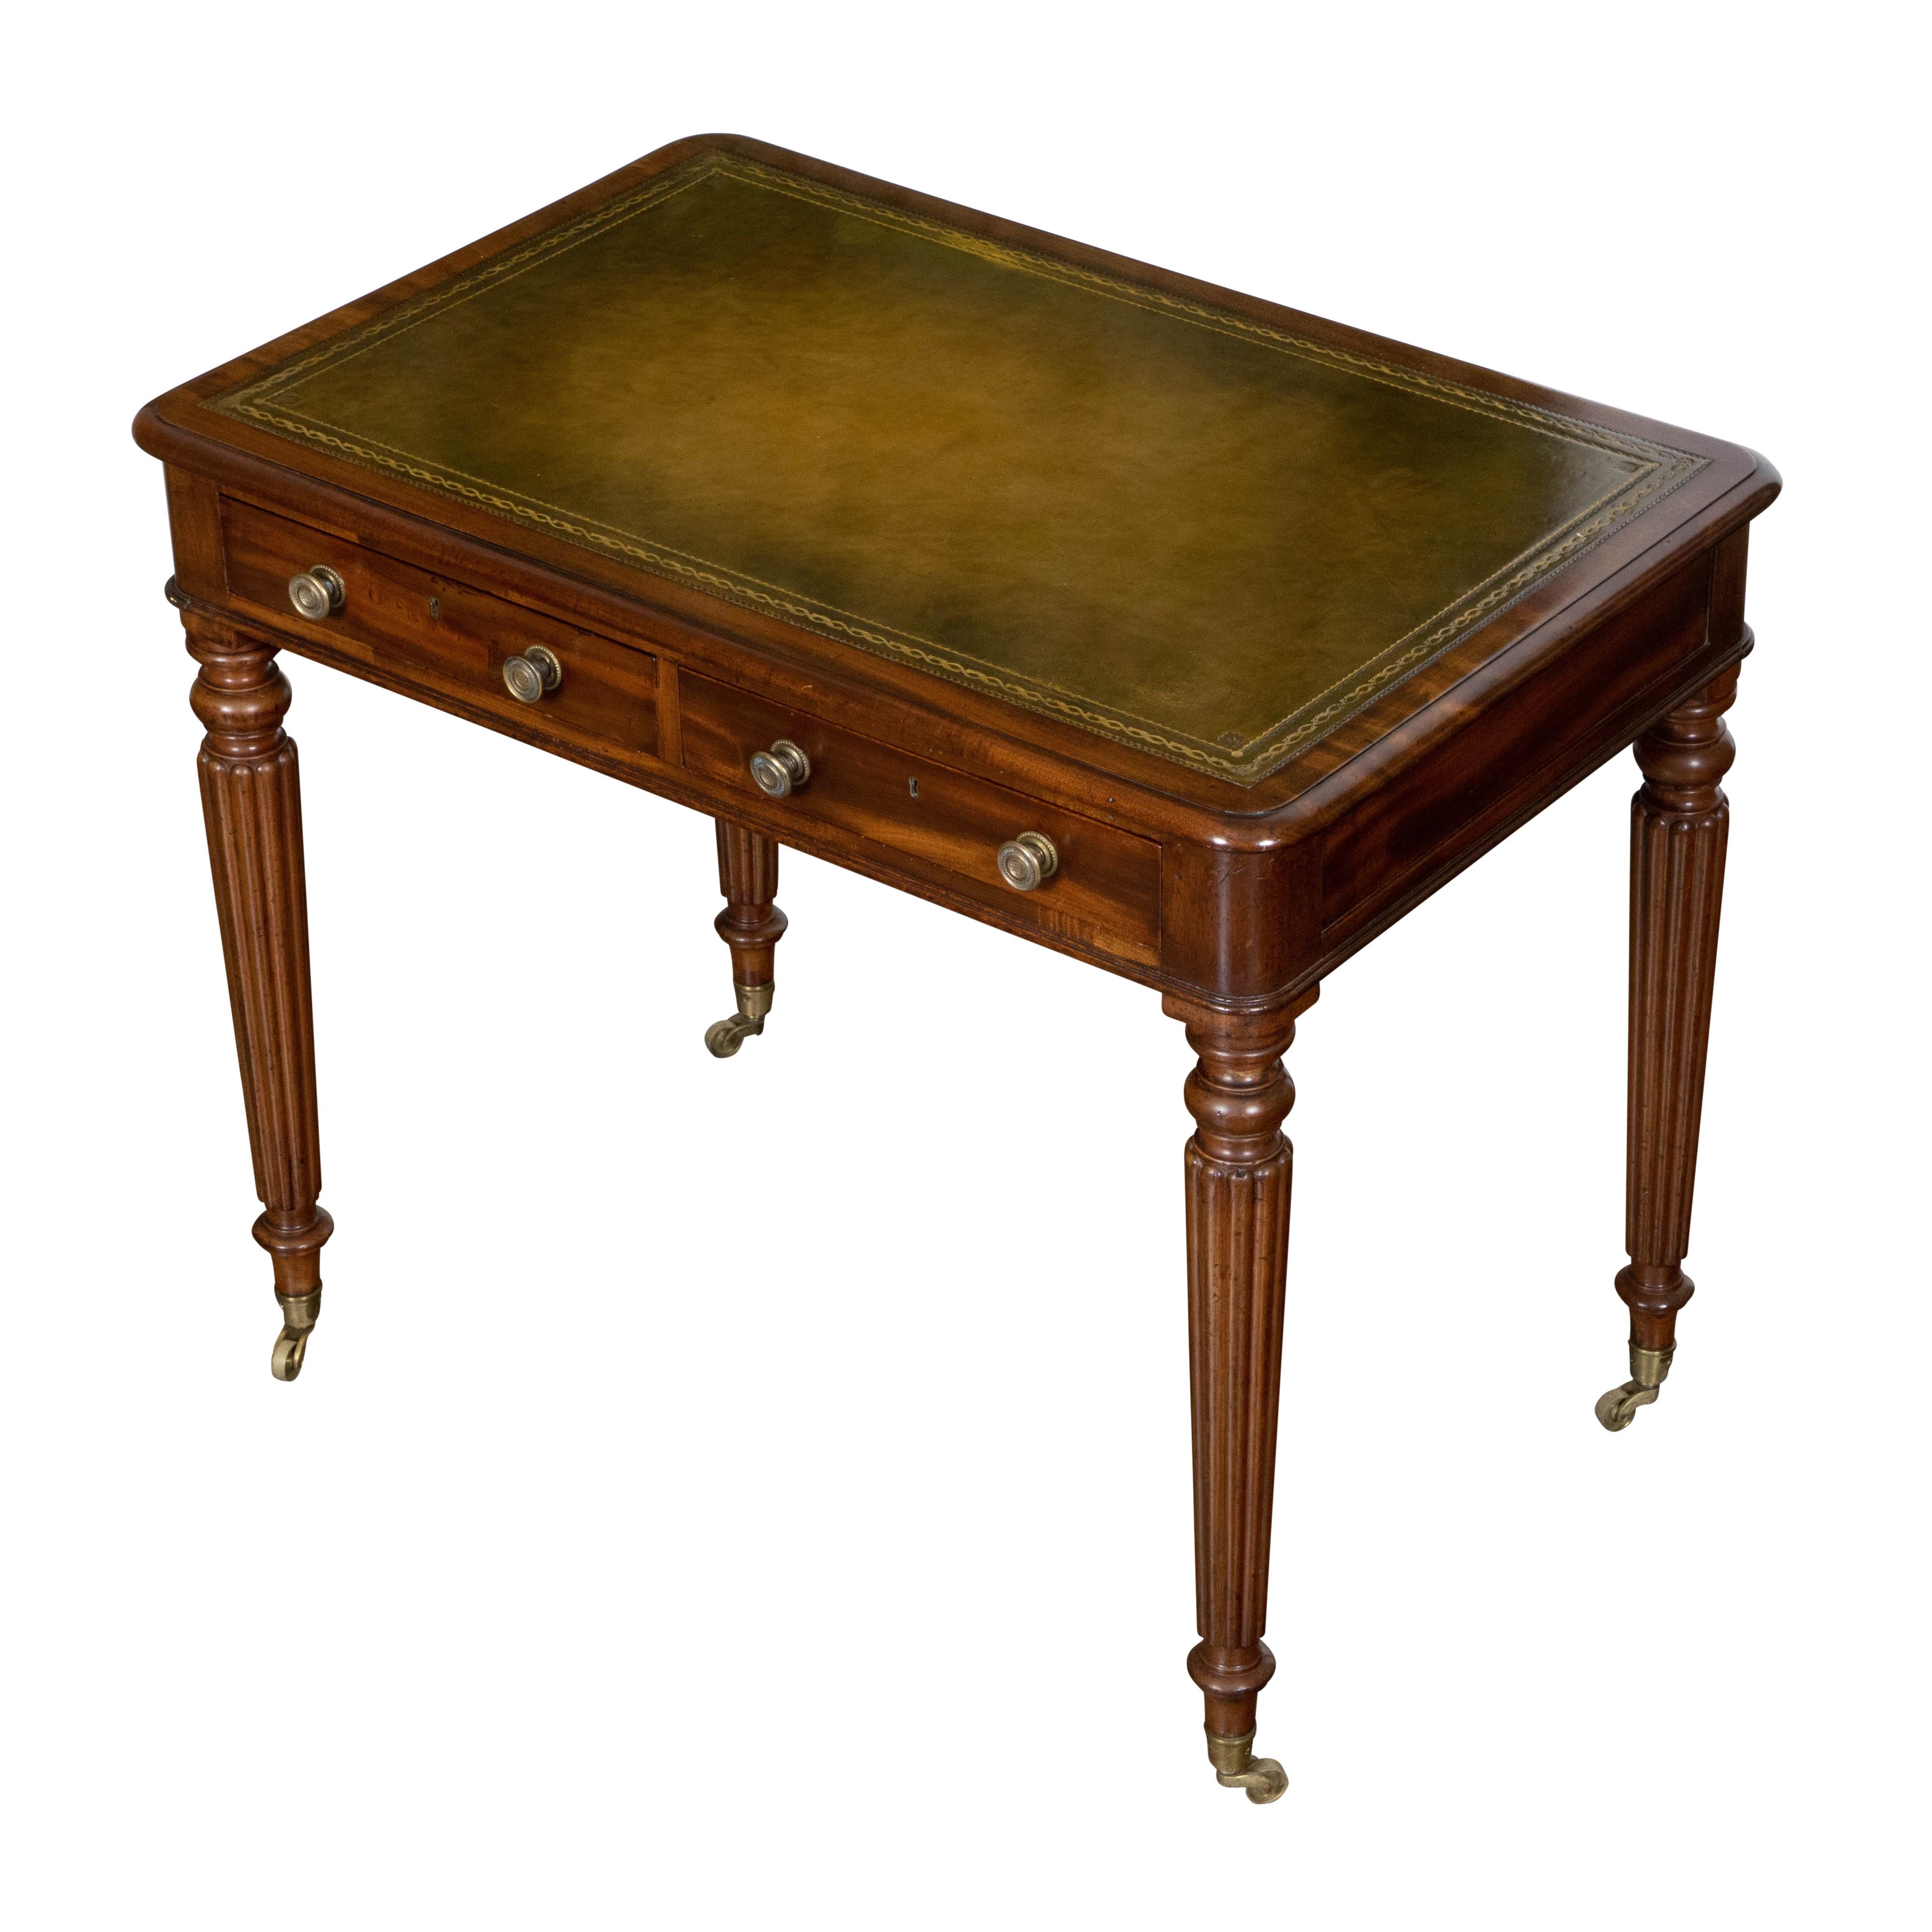 English 19th Century Mahogany Desk with Green Leather Top and Reeded Legs For Sale 2